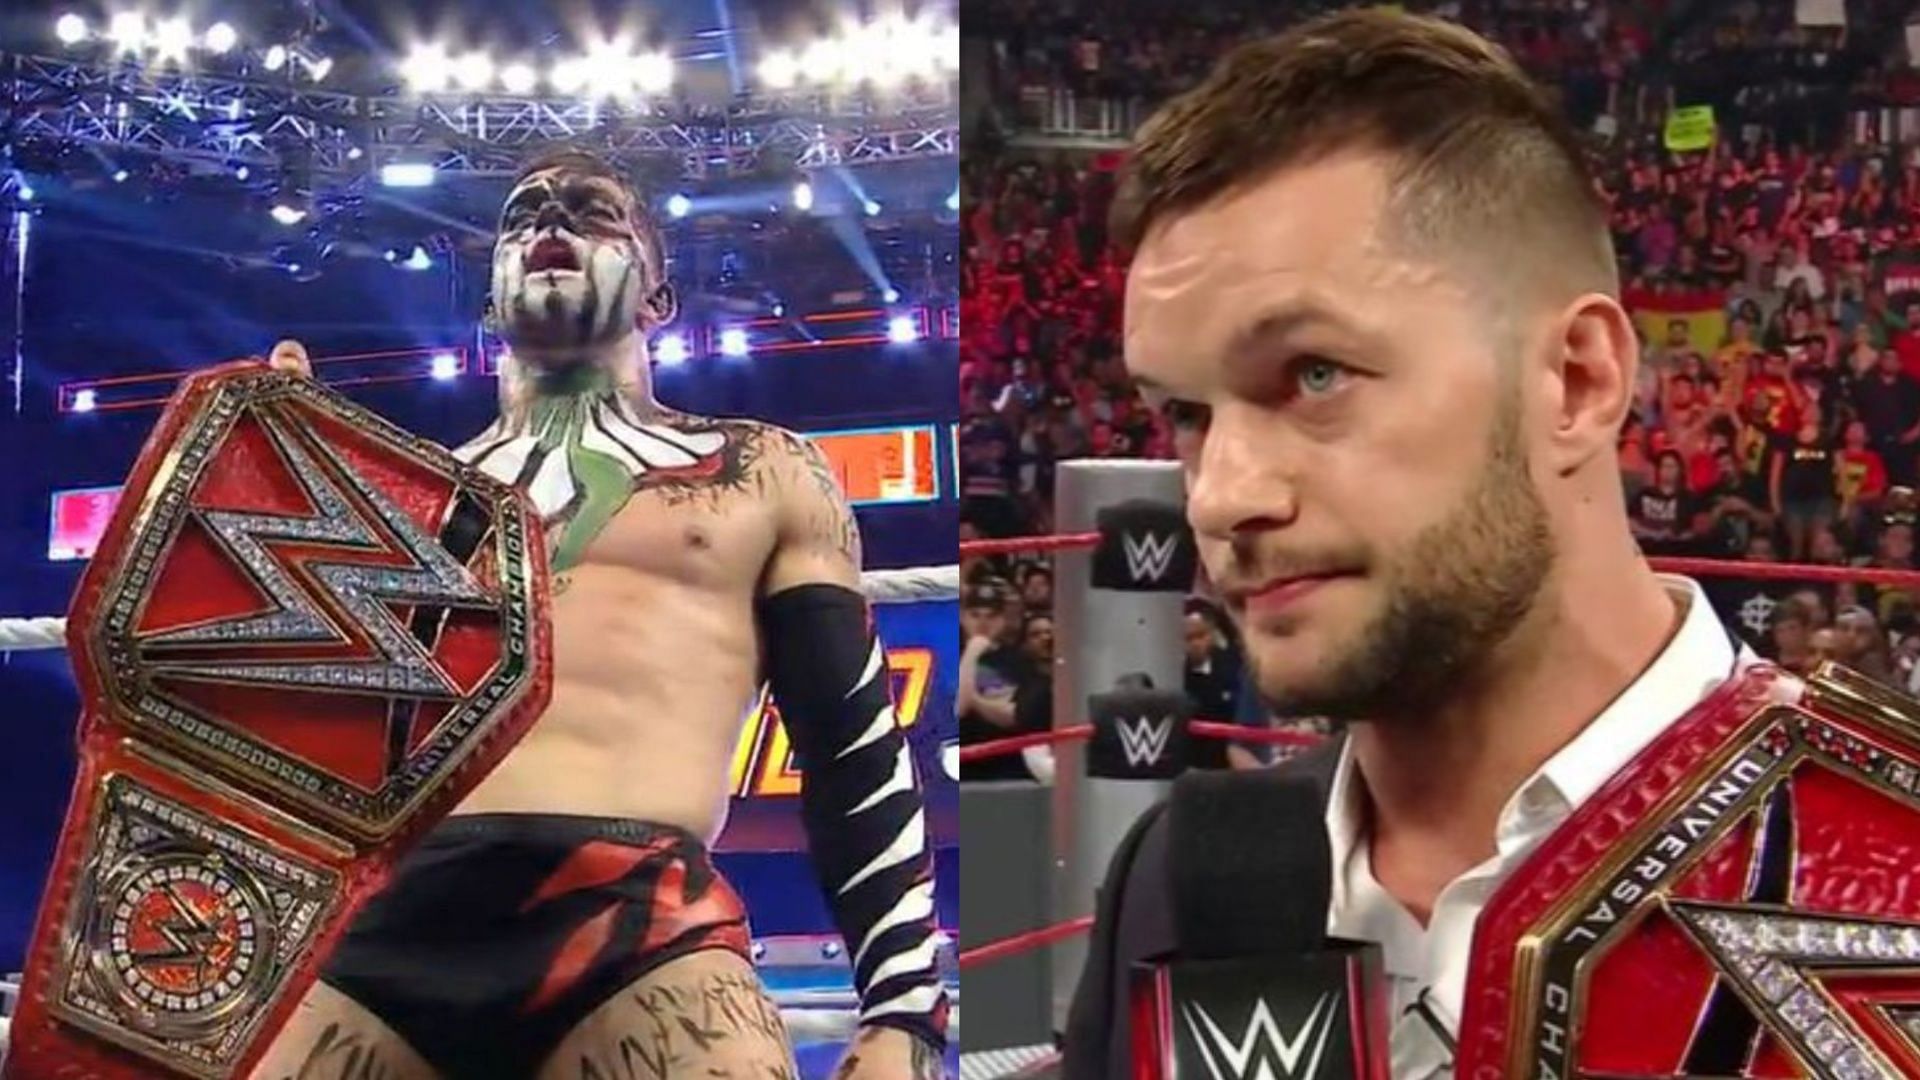 Finn Balor was forced to relinquish the WWE Universal Championship hours after winning it at SummerSlam 2016.